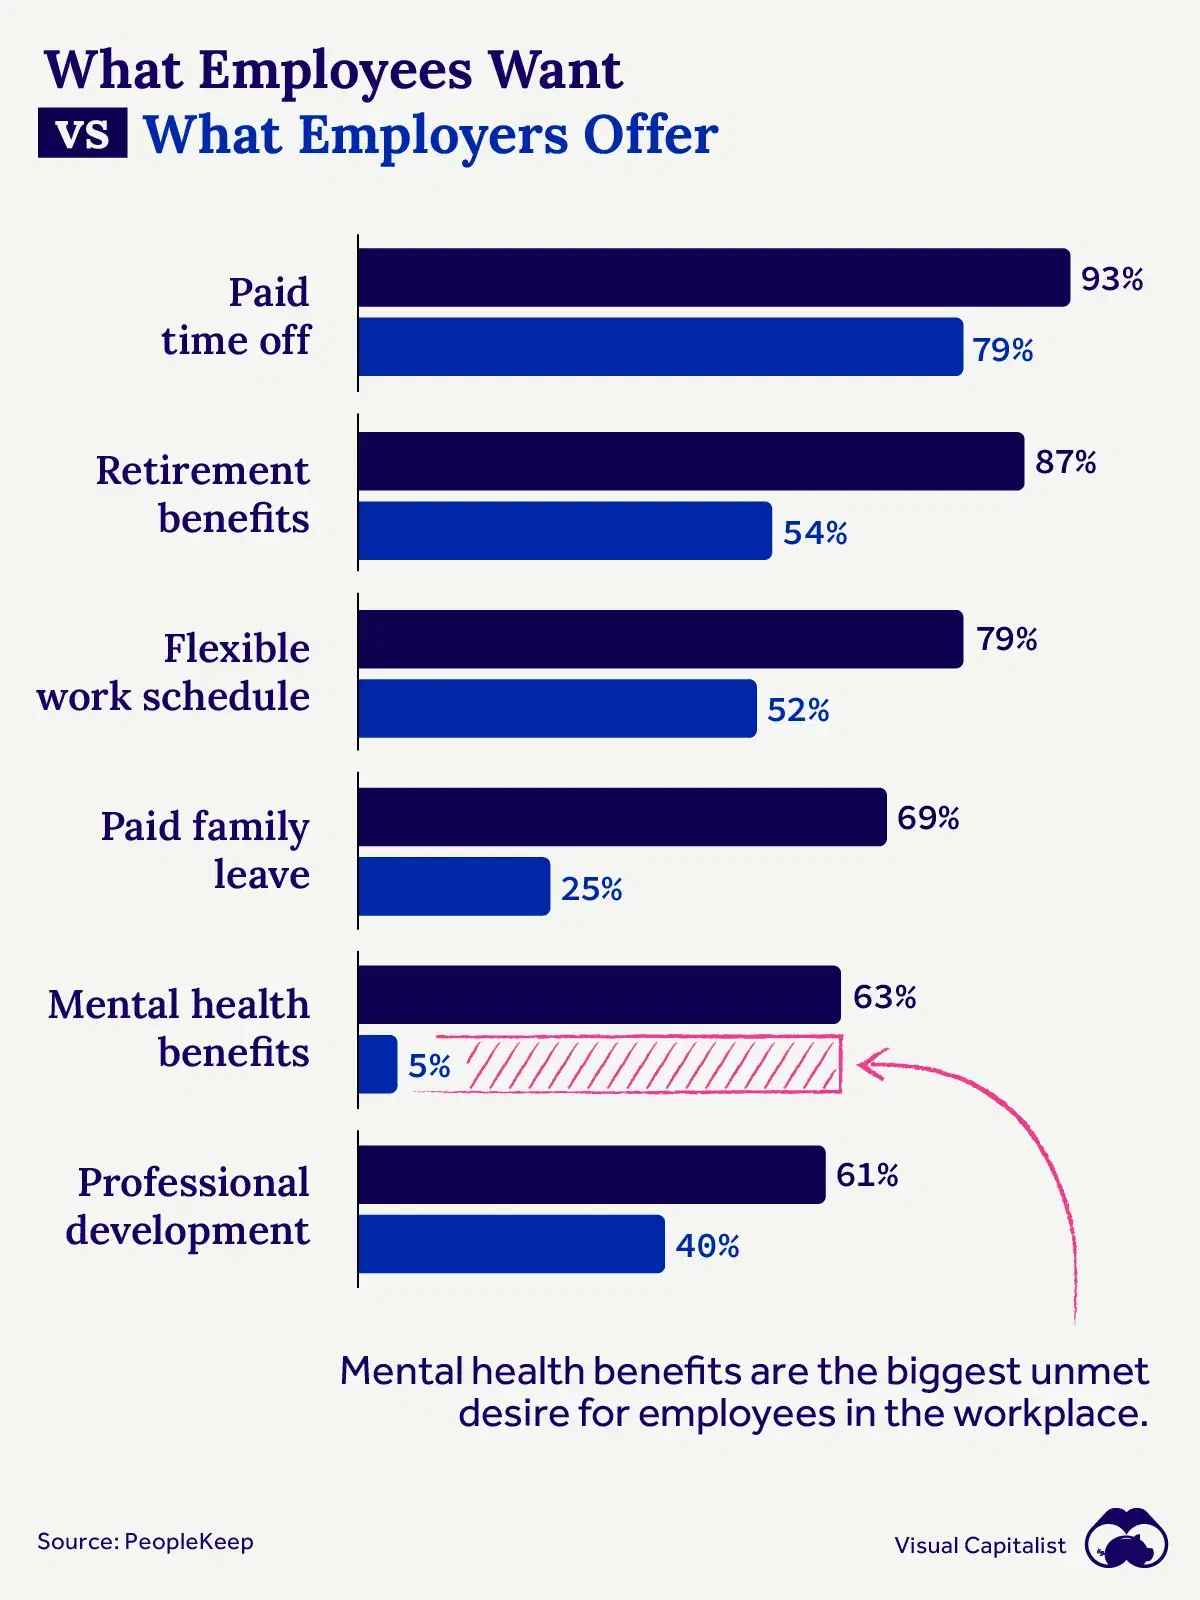 Employees Want More Mental Health Benefits, but Employers are Slow to Implement Them